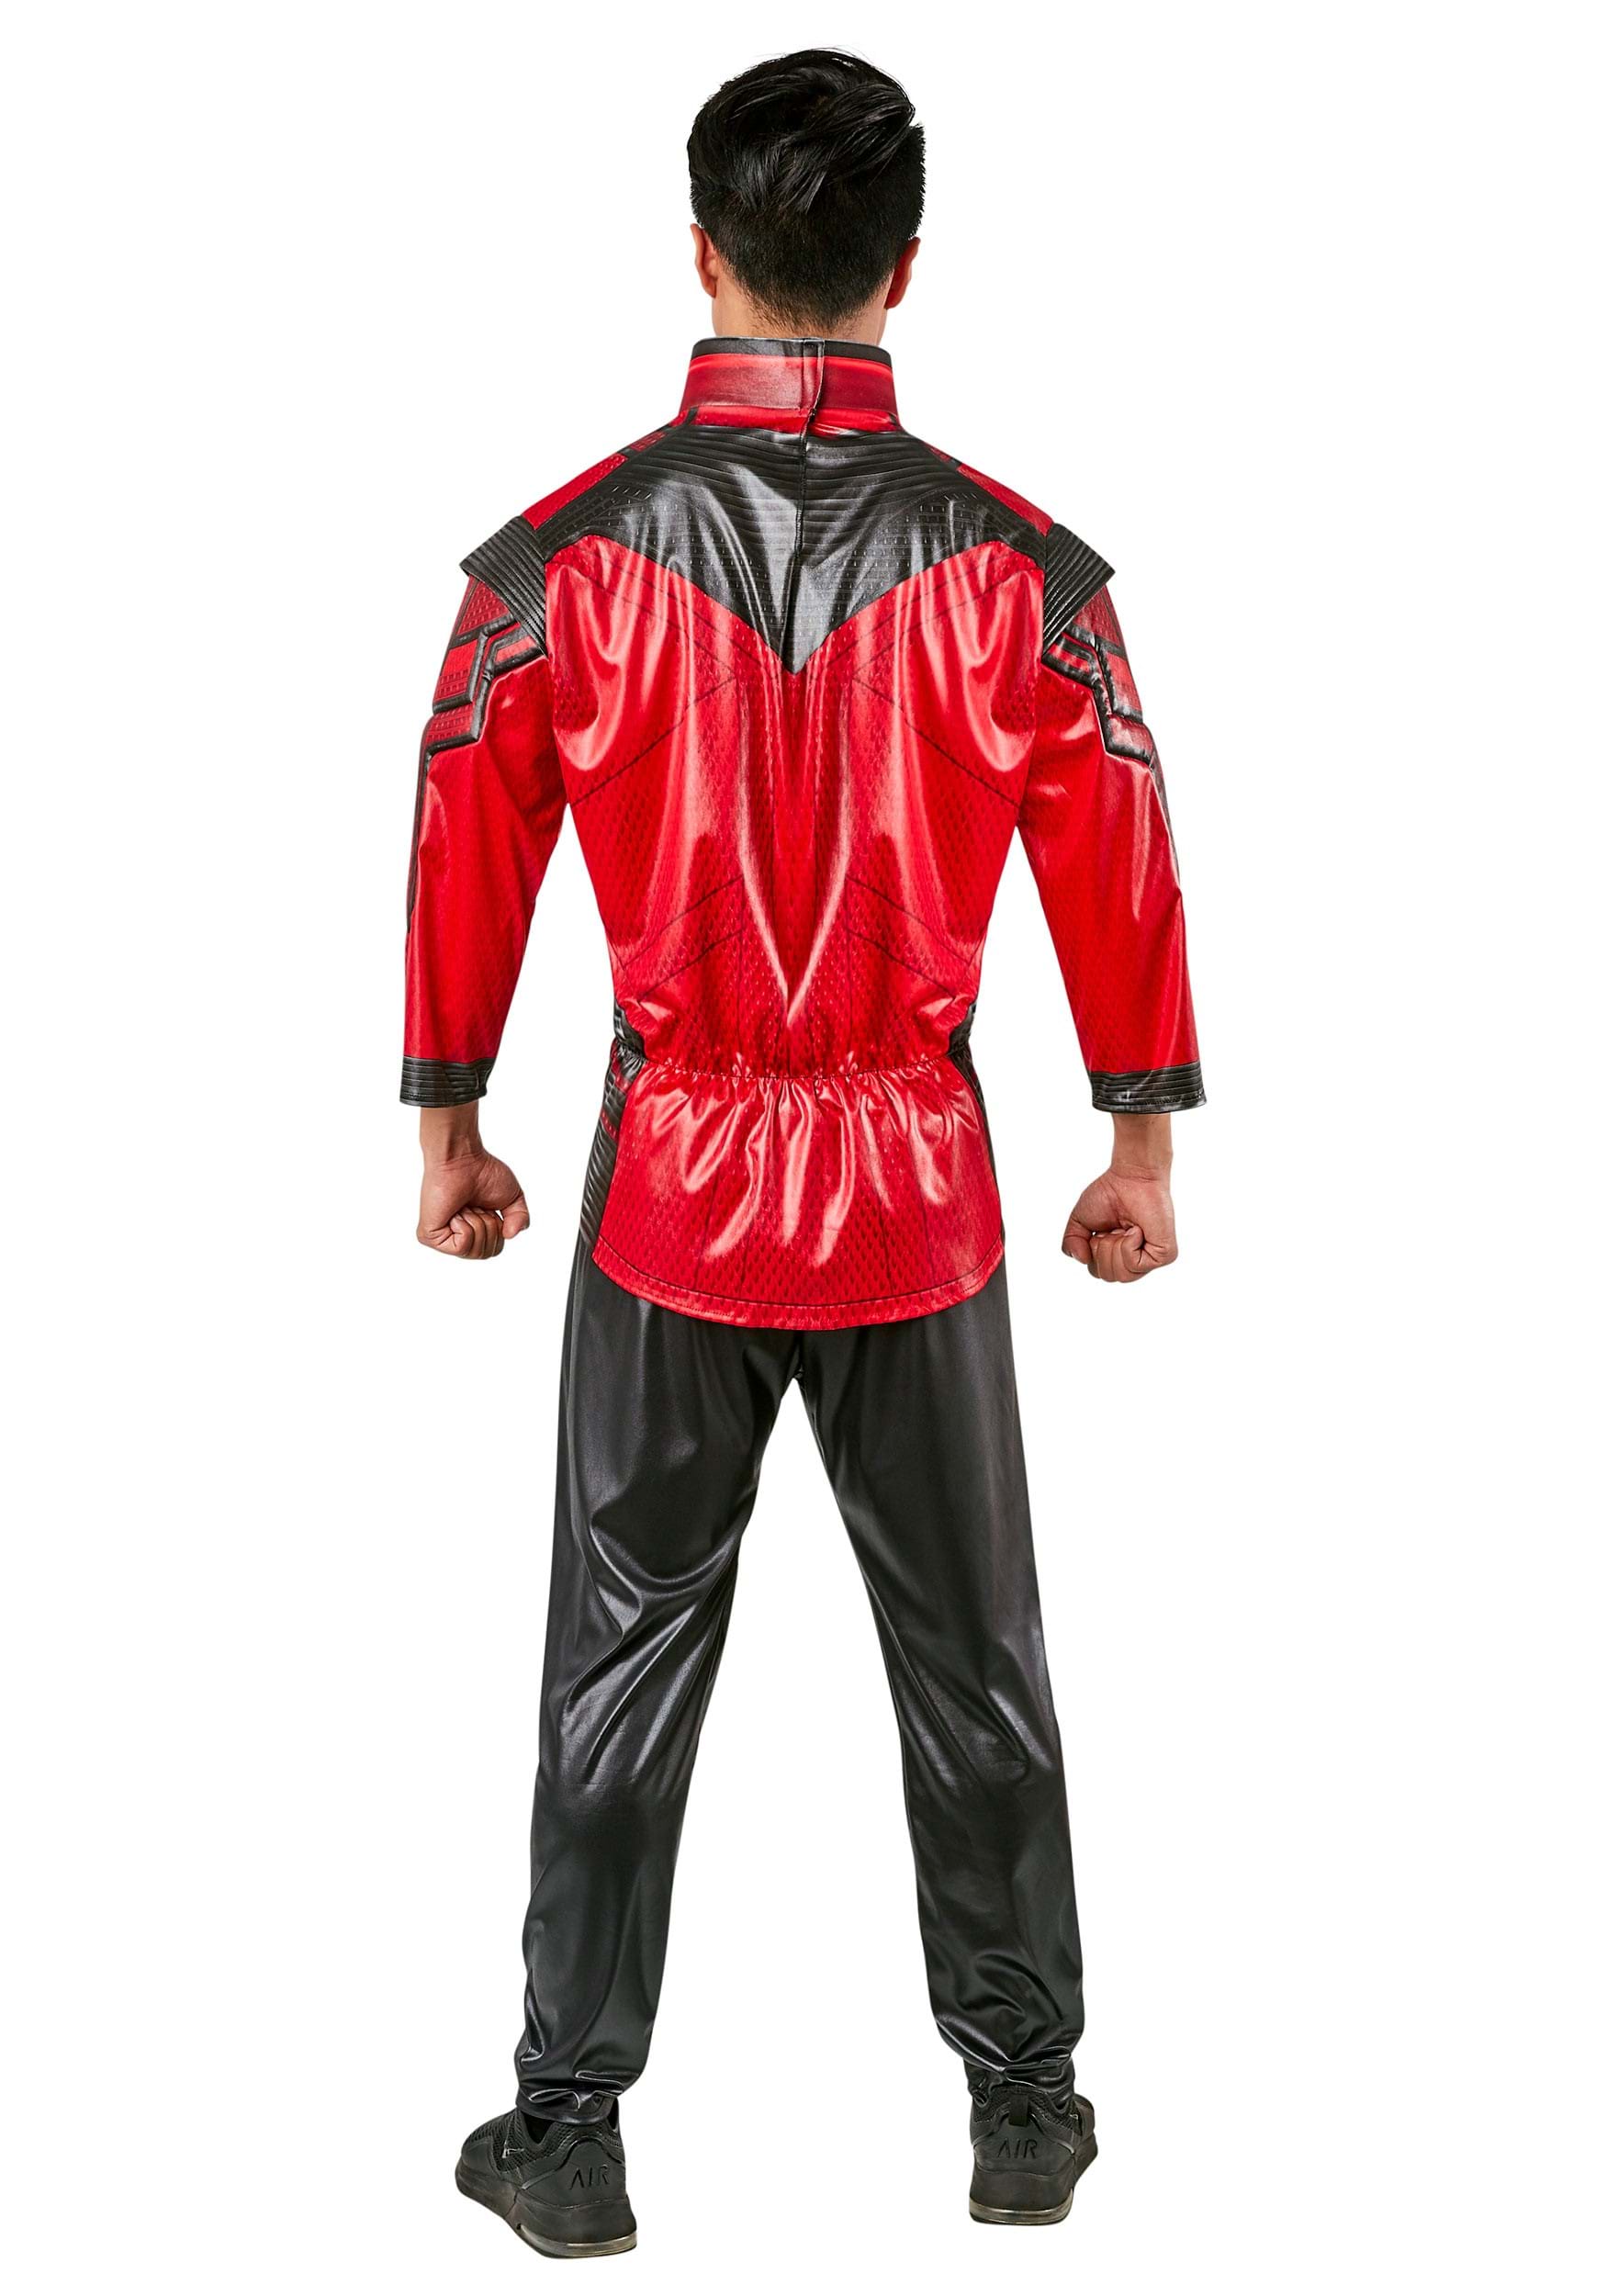 Men's Shang-Chi Deluxe Shang-Chi Costume